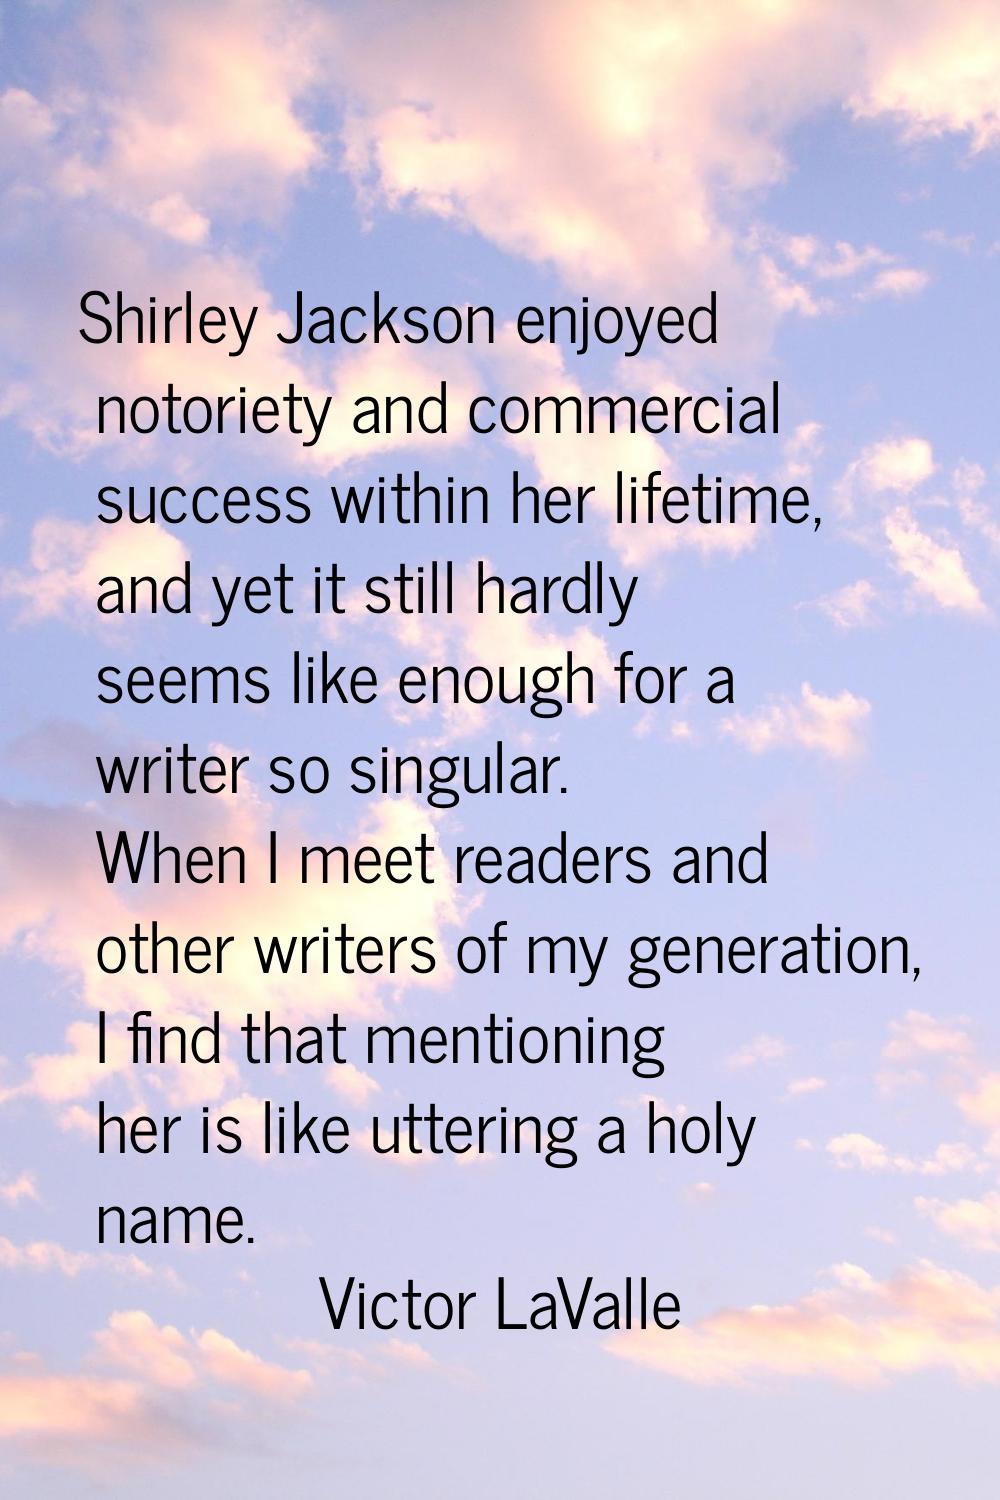 Shirley Jackson enjoyed notoriety and commercial success within her lifetime, and yet it still hard